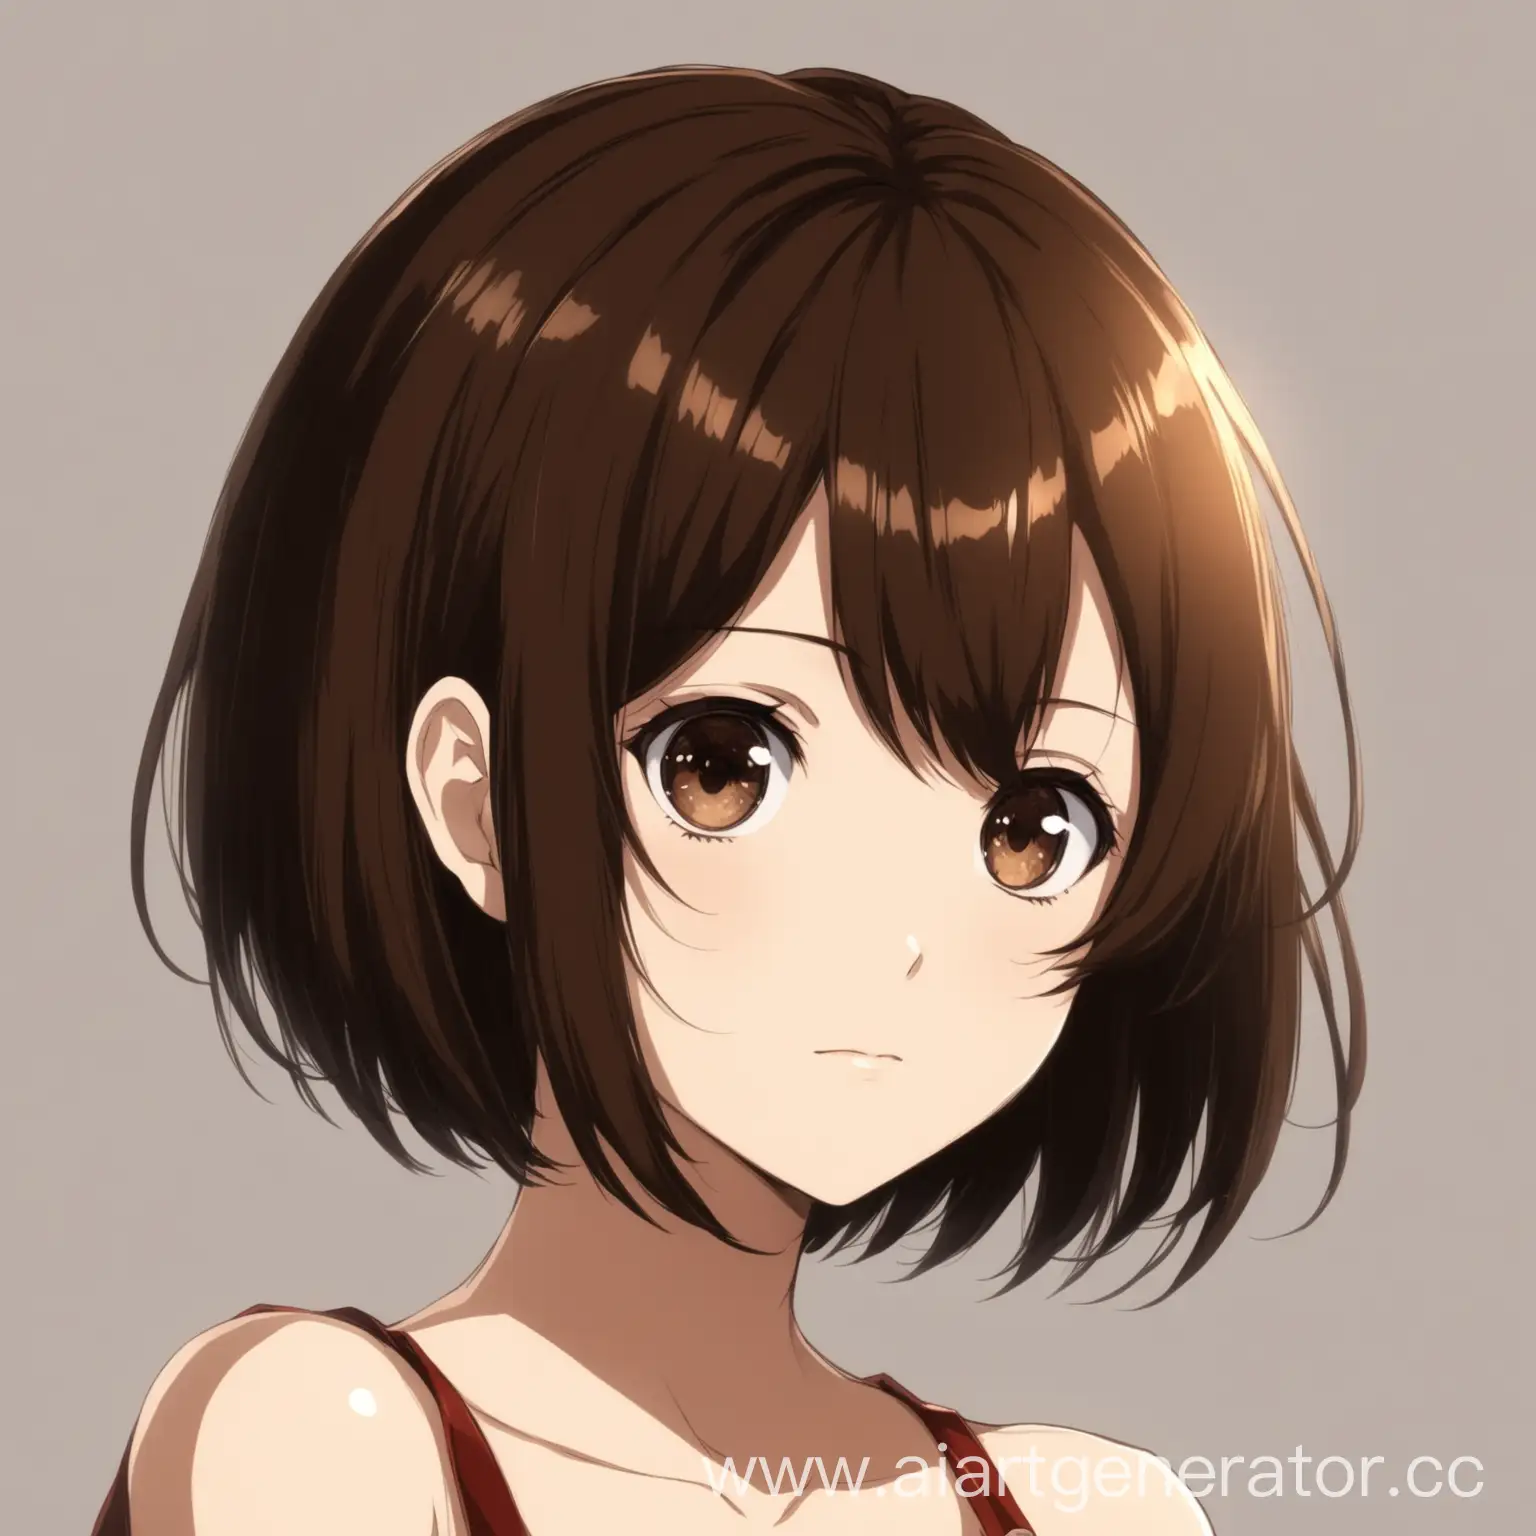 Brunette-Anime-Girl-with-Short-Hair-and-Brown-Eyes